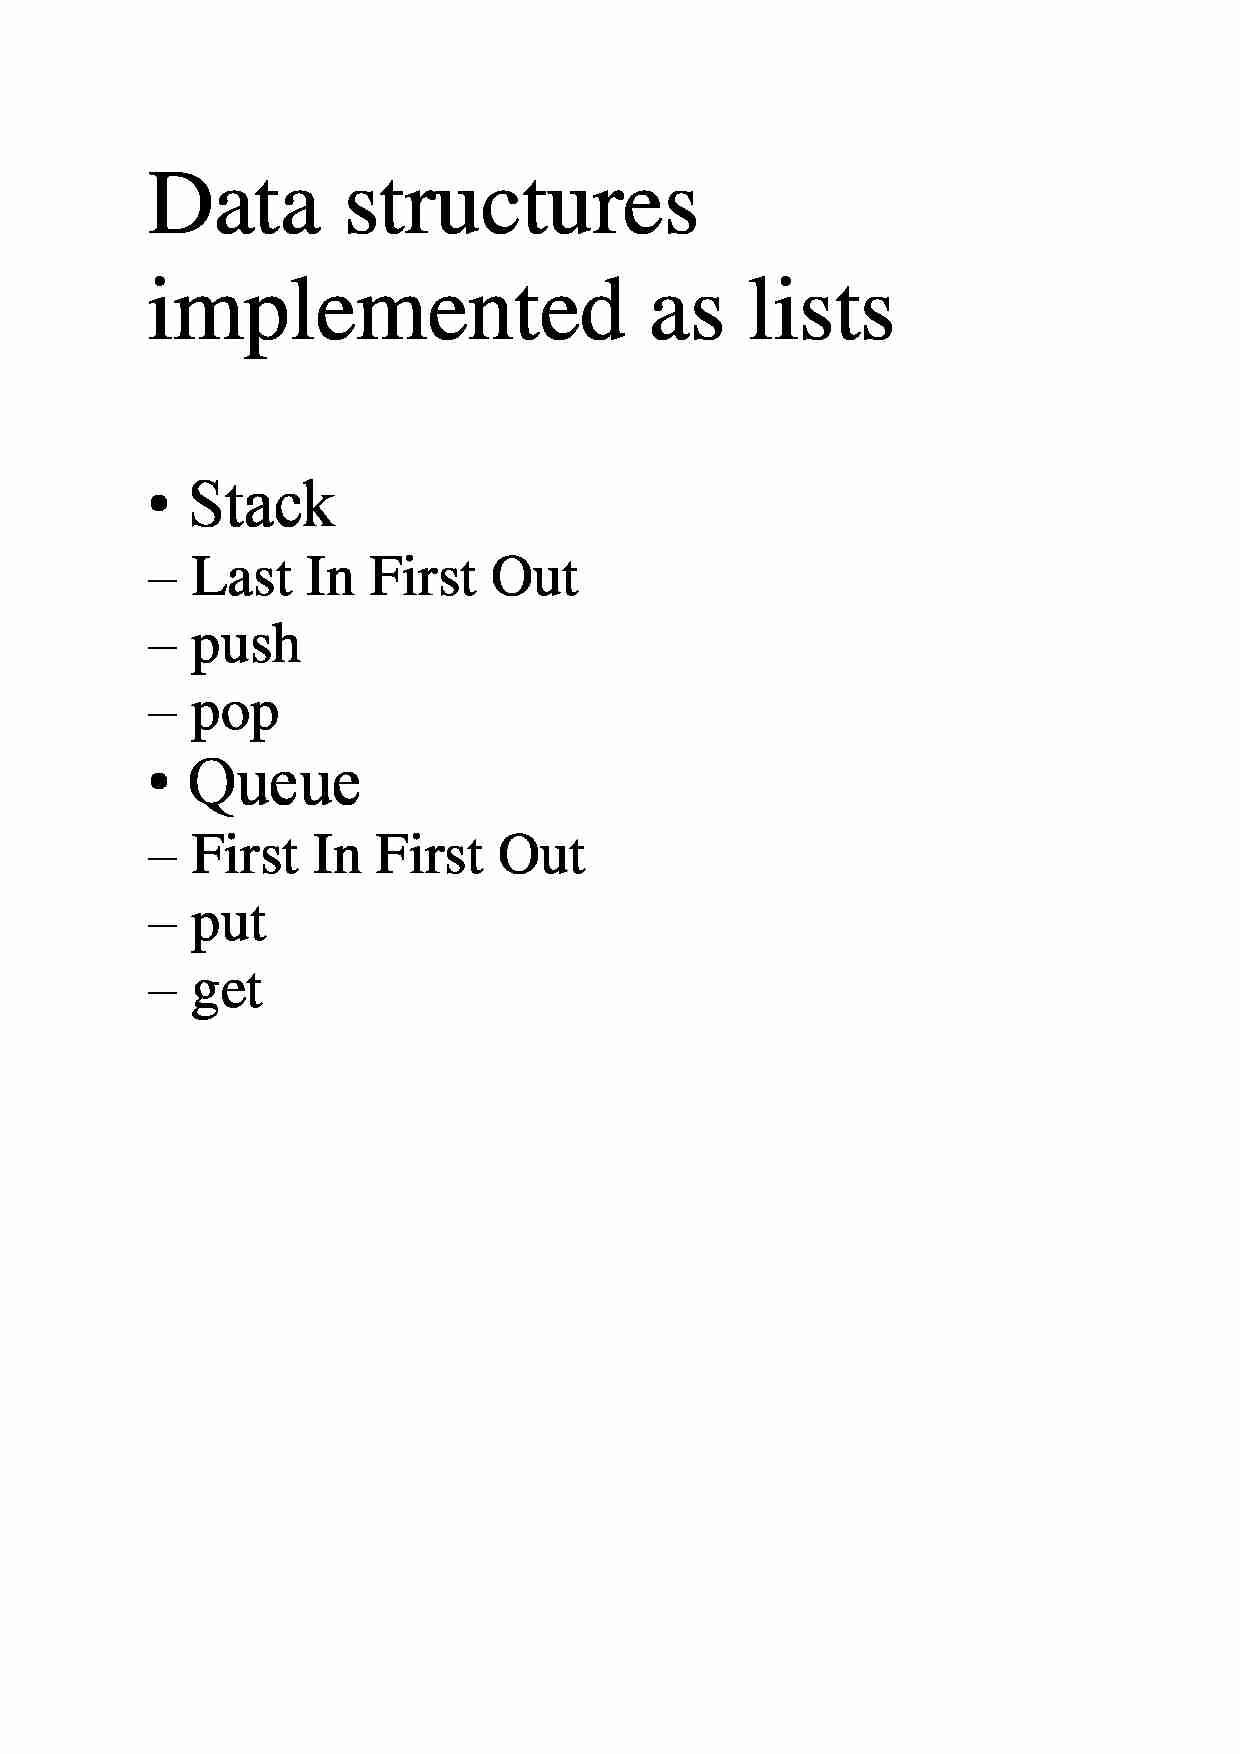 Data structures implemented as lists - strona 1